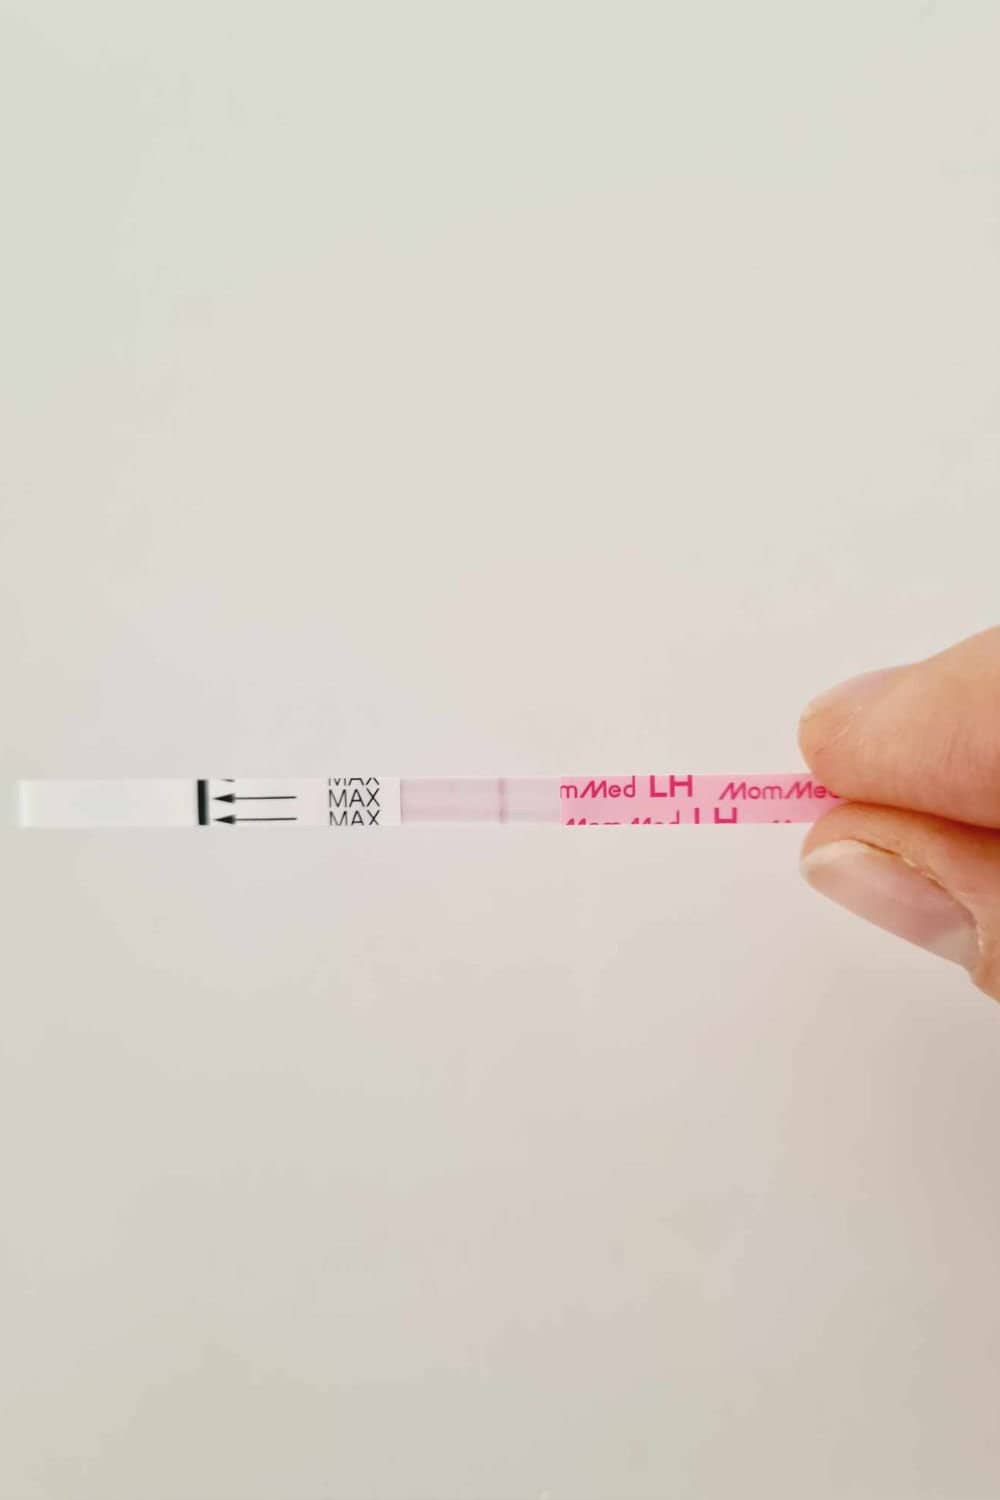 mommed used ovulation test strip